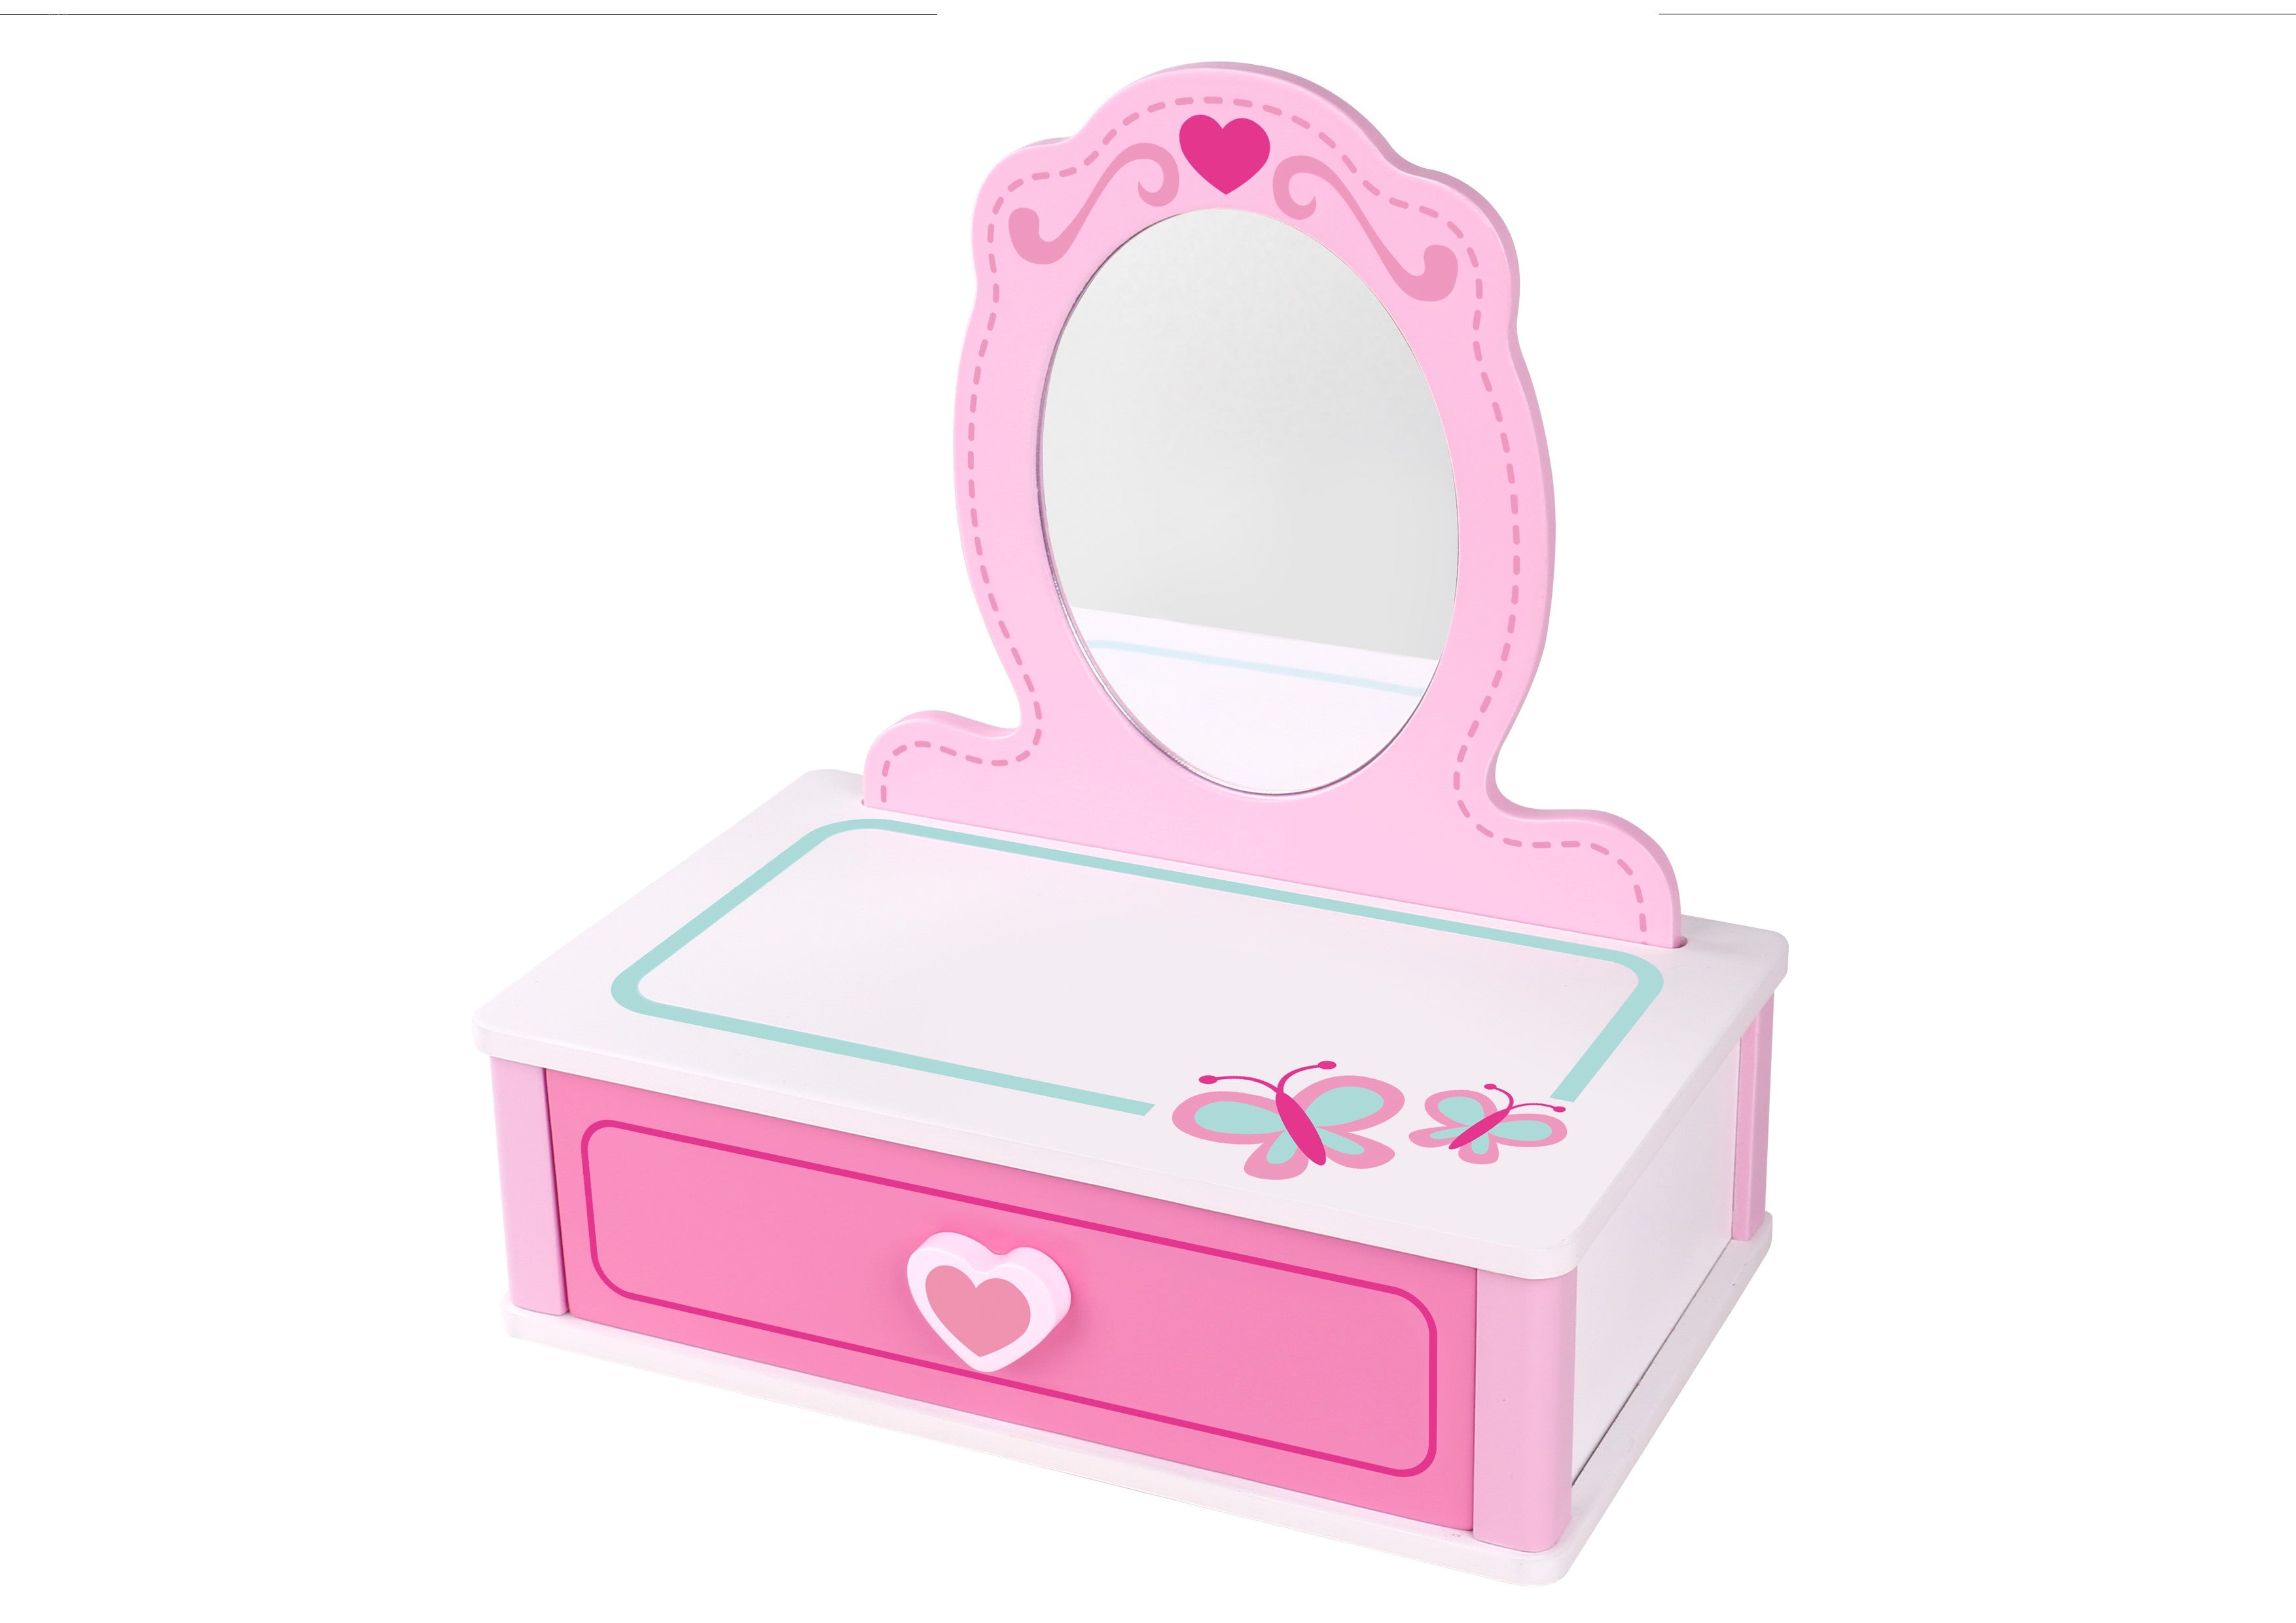 Toysters Wooden Makeup Station Toy for Toddler Girls